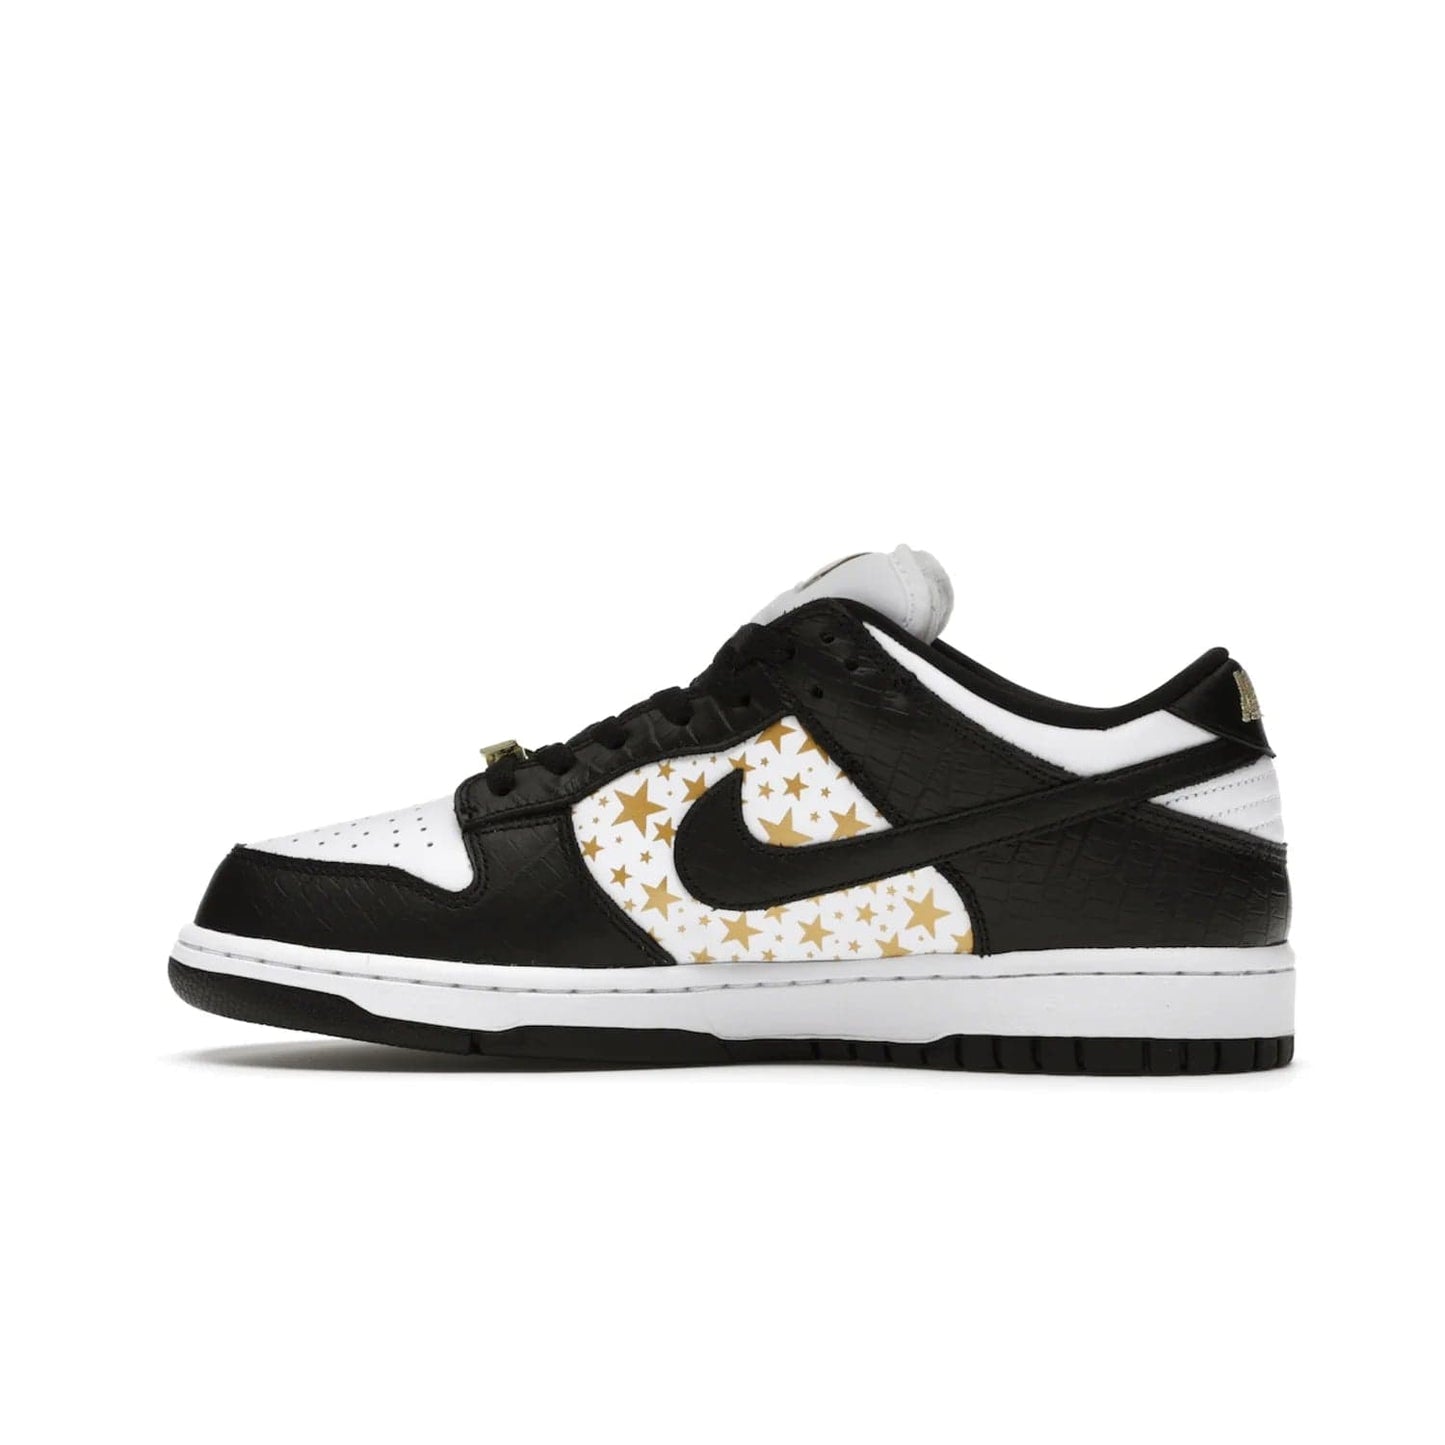 Nike SB Dunk Low Supreme Stars Black (2021) - Image 20 - Only at www.BallersClubKickz.com - Retro style and signature details make the Nike SB Dunk Low Supreme Black a must-have. This special edition shoe features a white leather upper and black croc skin overlays complemented by gold stars and deubré. Enjoy a piece of SB history and grab yours today.